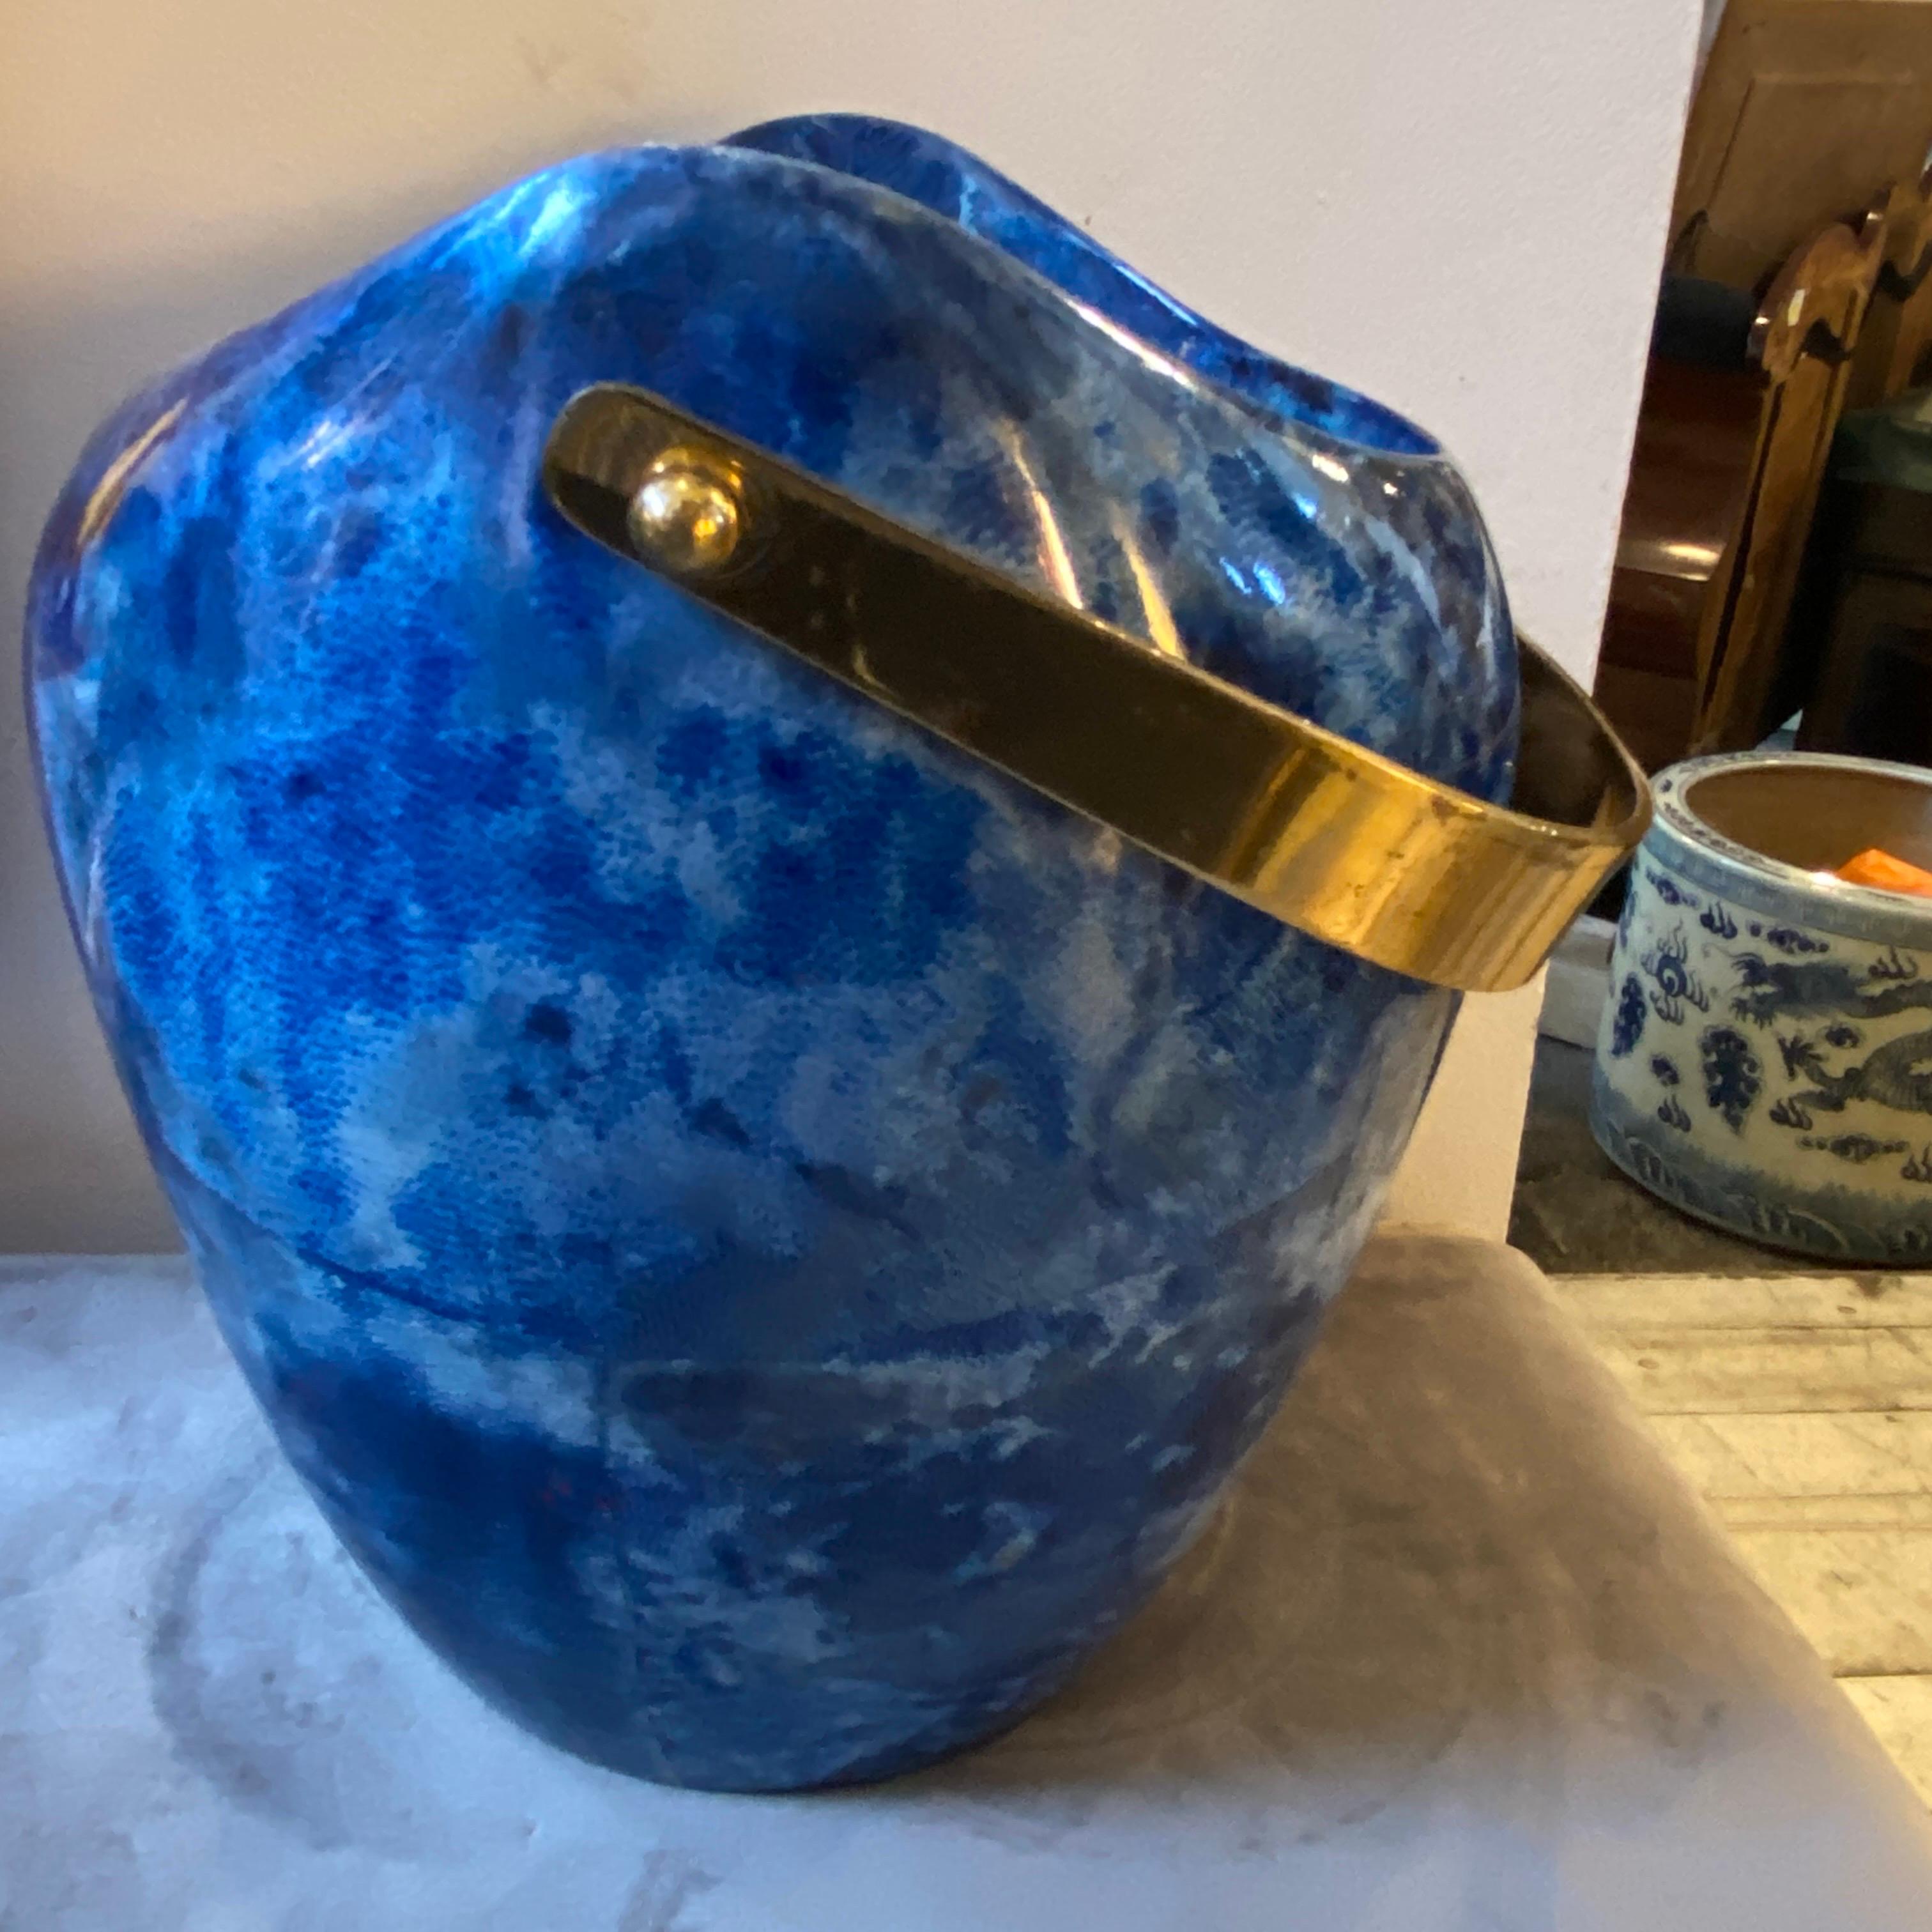 A rare brass and goatskin wine cooler also usable as an ice bucket made in Italy In the Sixties, it's in good conditions. It's marked on the bottom by the producer Macabo. The blue color of the goatskin it's extremely rare and makes it very